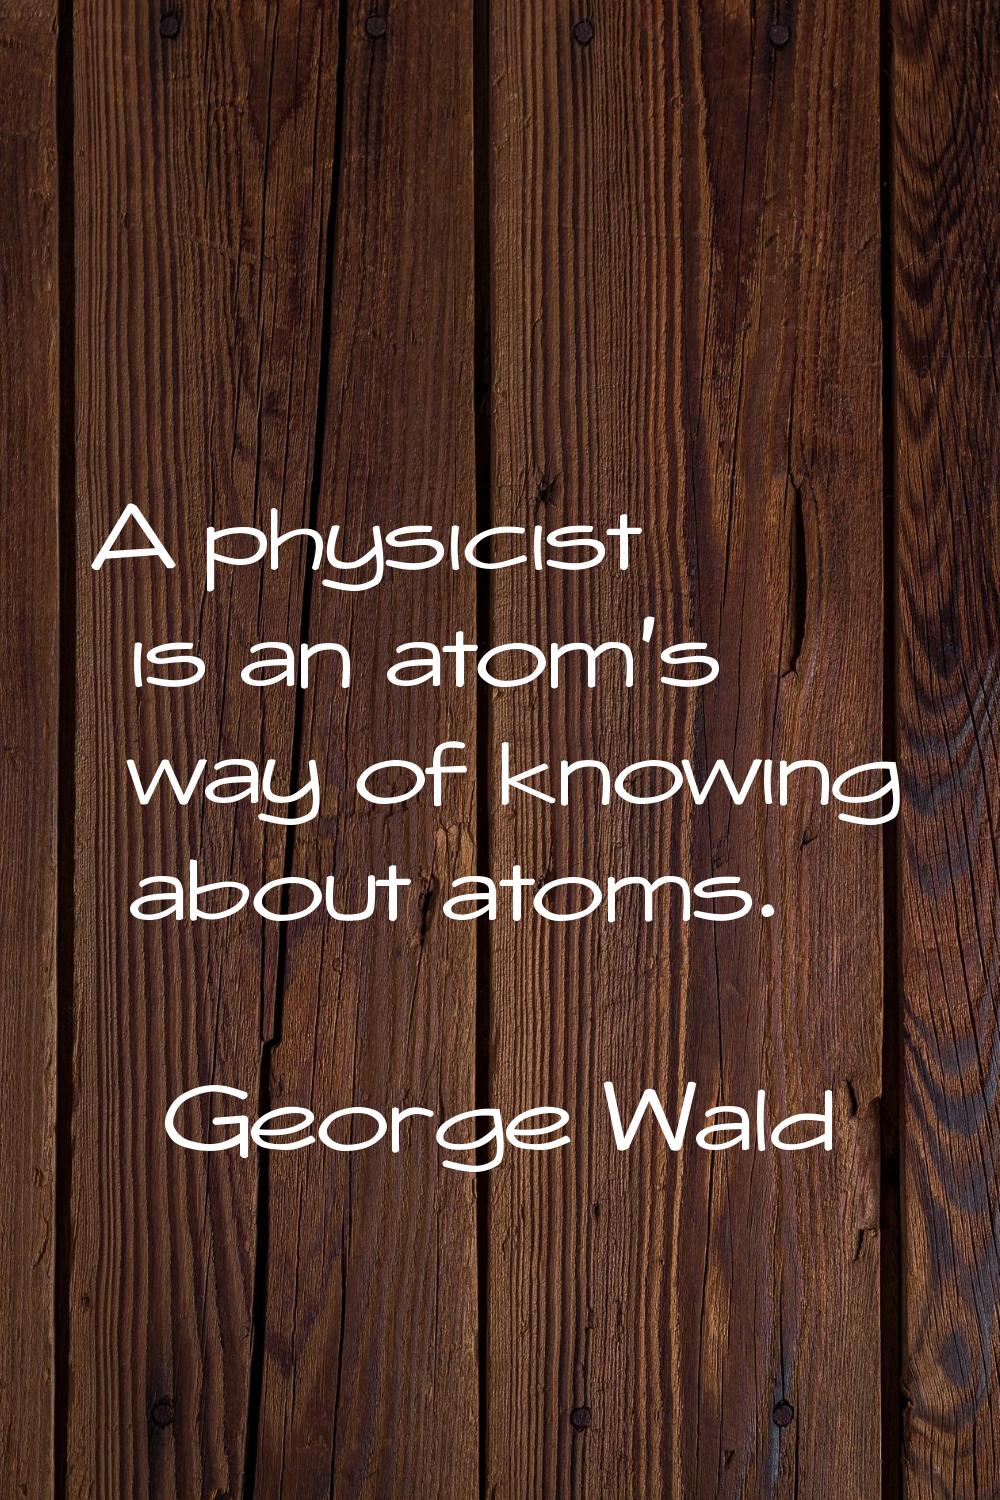 A physicist is an atom's way of knowing about atoms.